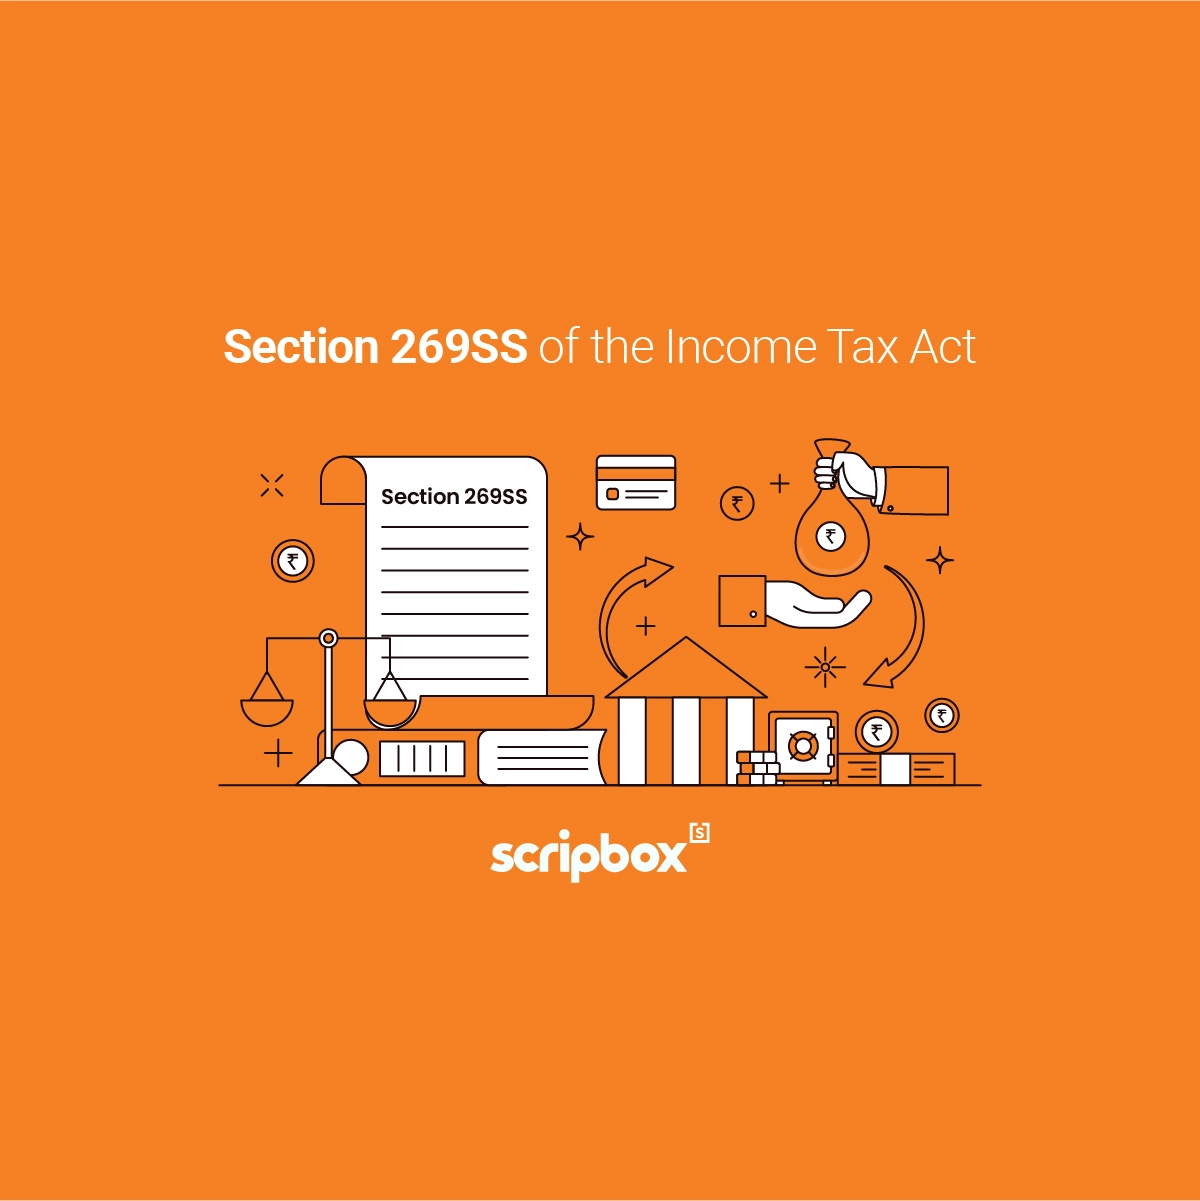 Section 269ss of income tax act